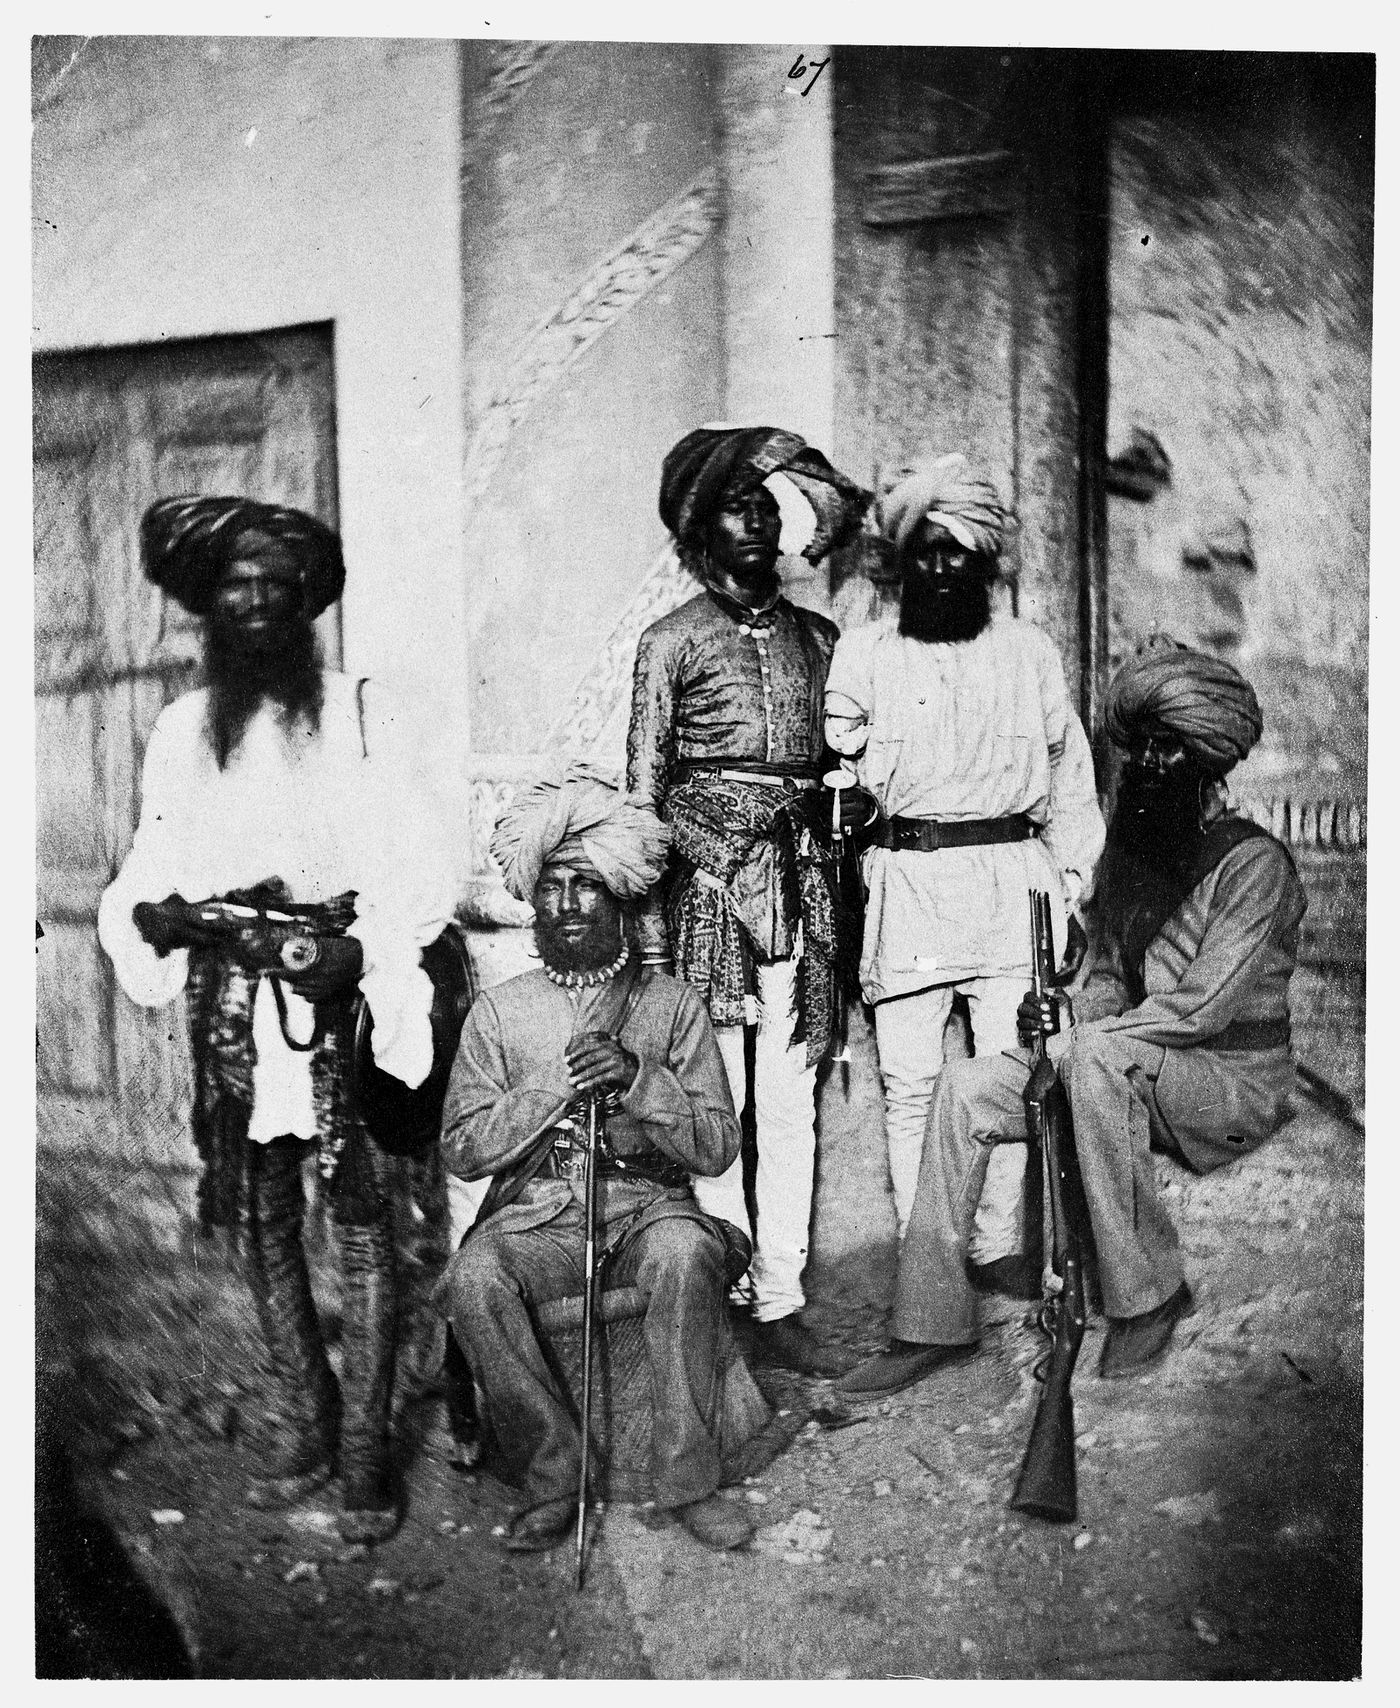 Group portrait of Sikh soldiers of the 15th Punjab Regiment, Lucknow, India